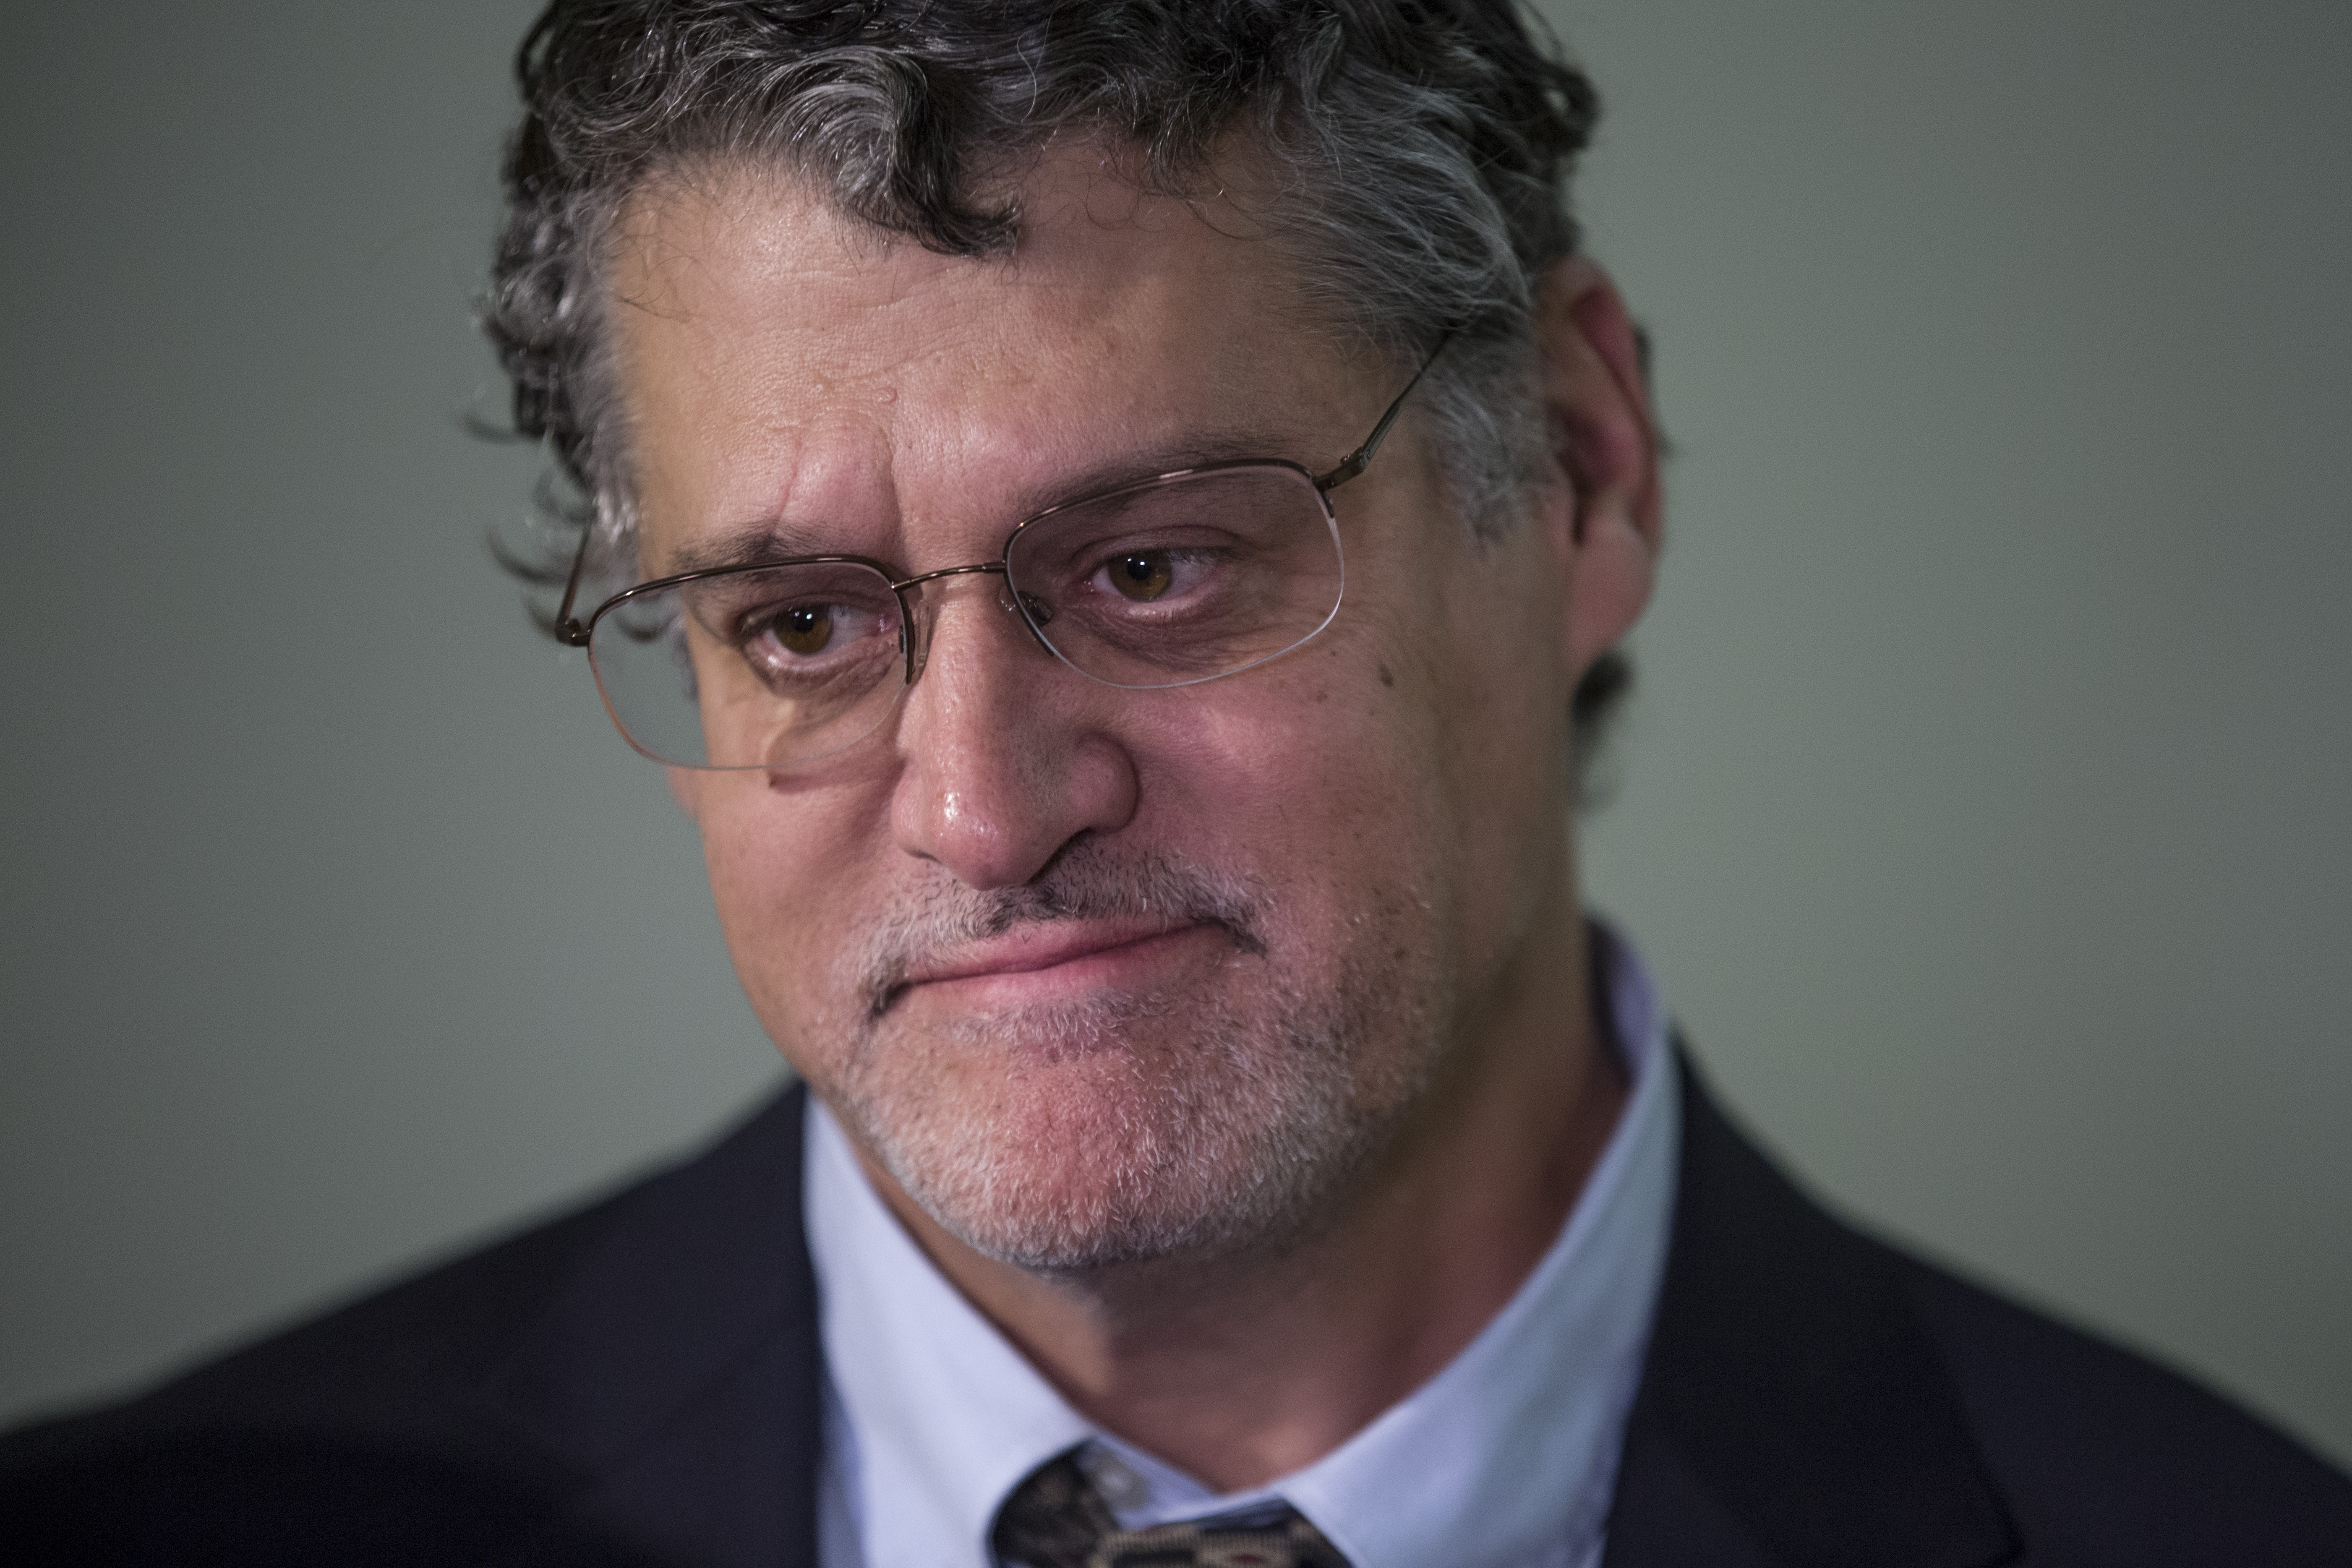 Fusion GPS Co-Founder Glenn Simpson listens as his lawyer, Joshua Levy, speaks to members of the media following a meeting with members of the House Judiciary and Oversight Committee in the Rayburn Office Building on Capitol Hill on October 16, 2018 in Washington, D.C. (Photo by Zach Gibson/Getty Images)